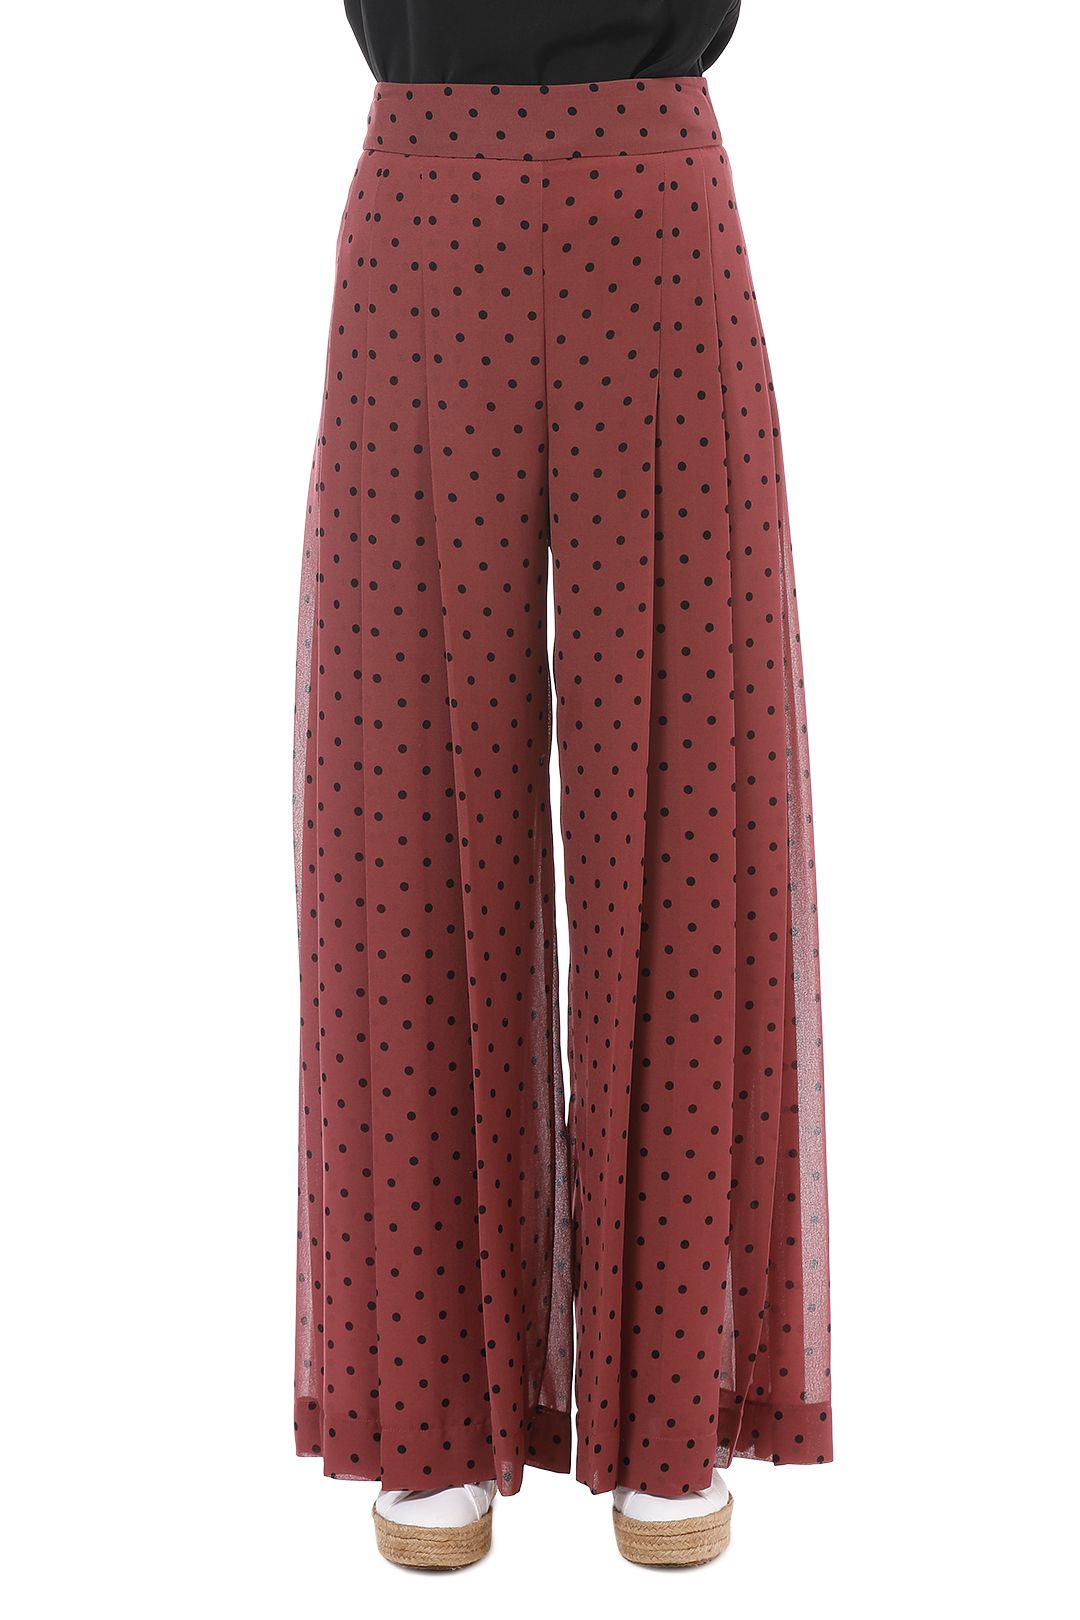 See by Chloe - Pleated Polka Dot Pant - Burgundy - Front Detail